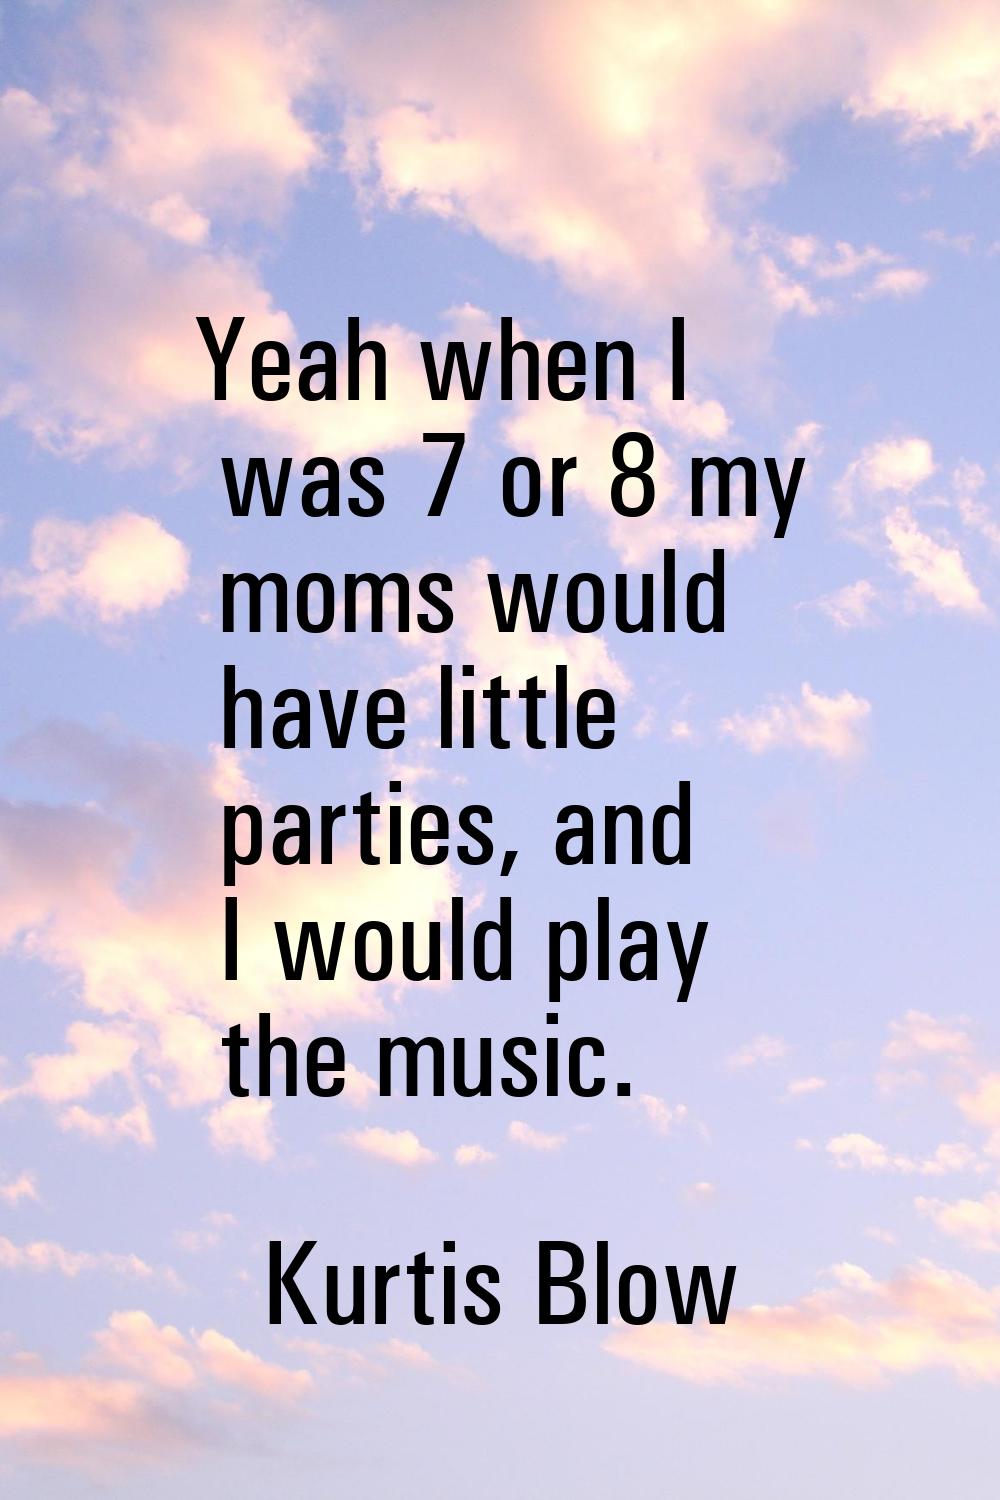 Yeah when I was 7 or 8 my moms would have little parties, and I would play the music.